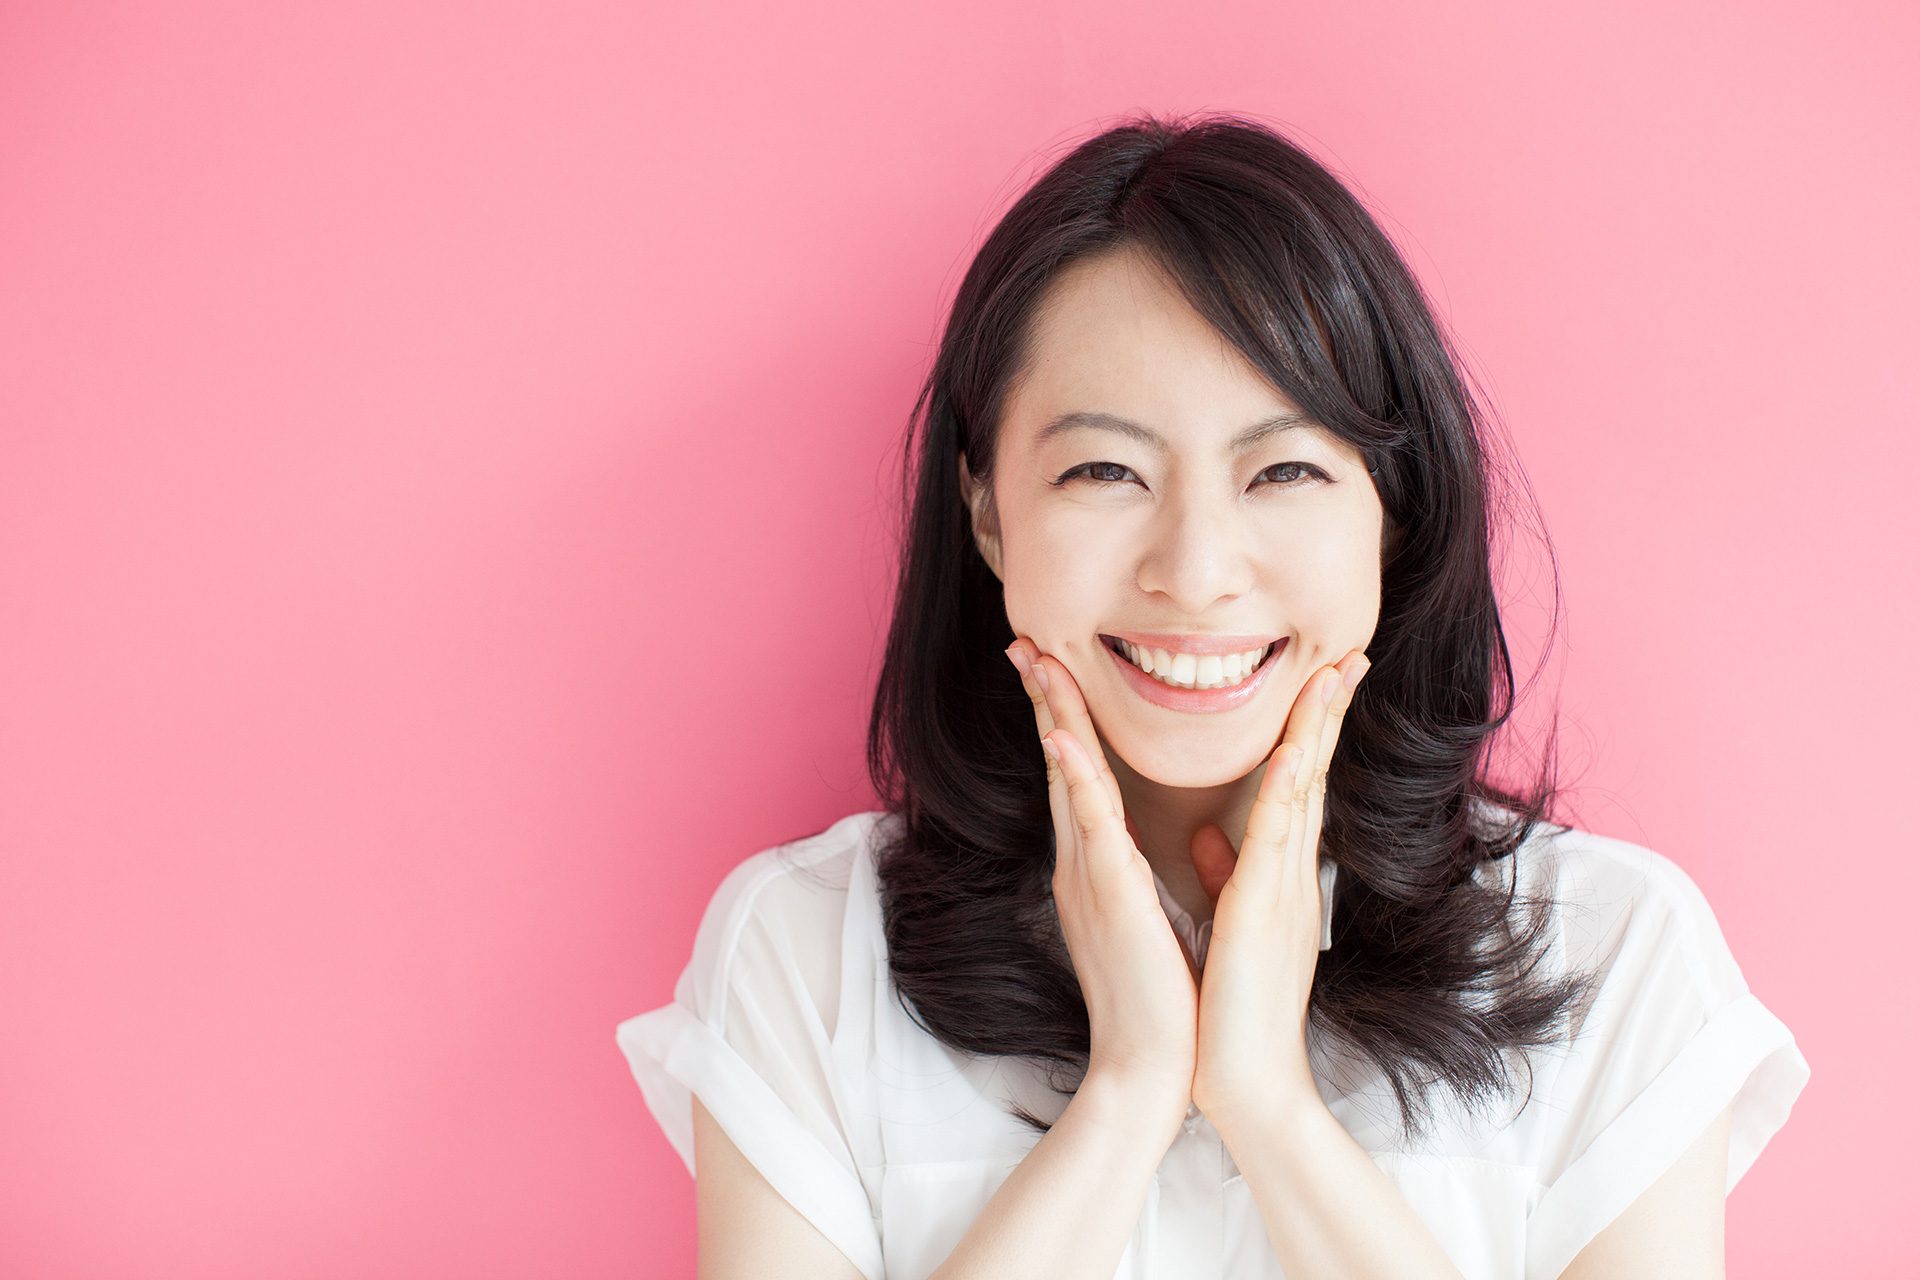 Woman smiling with her hands besides mouth with pink background.